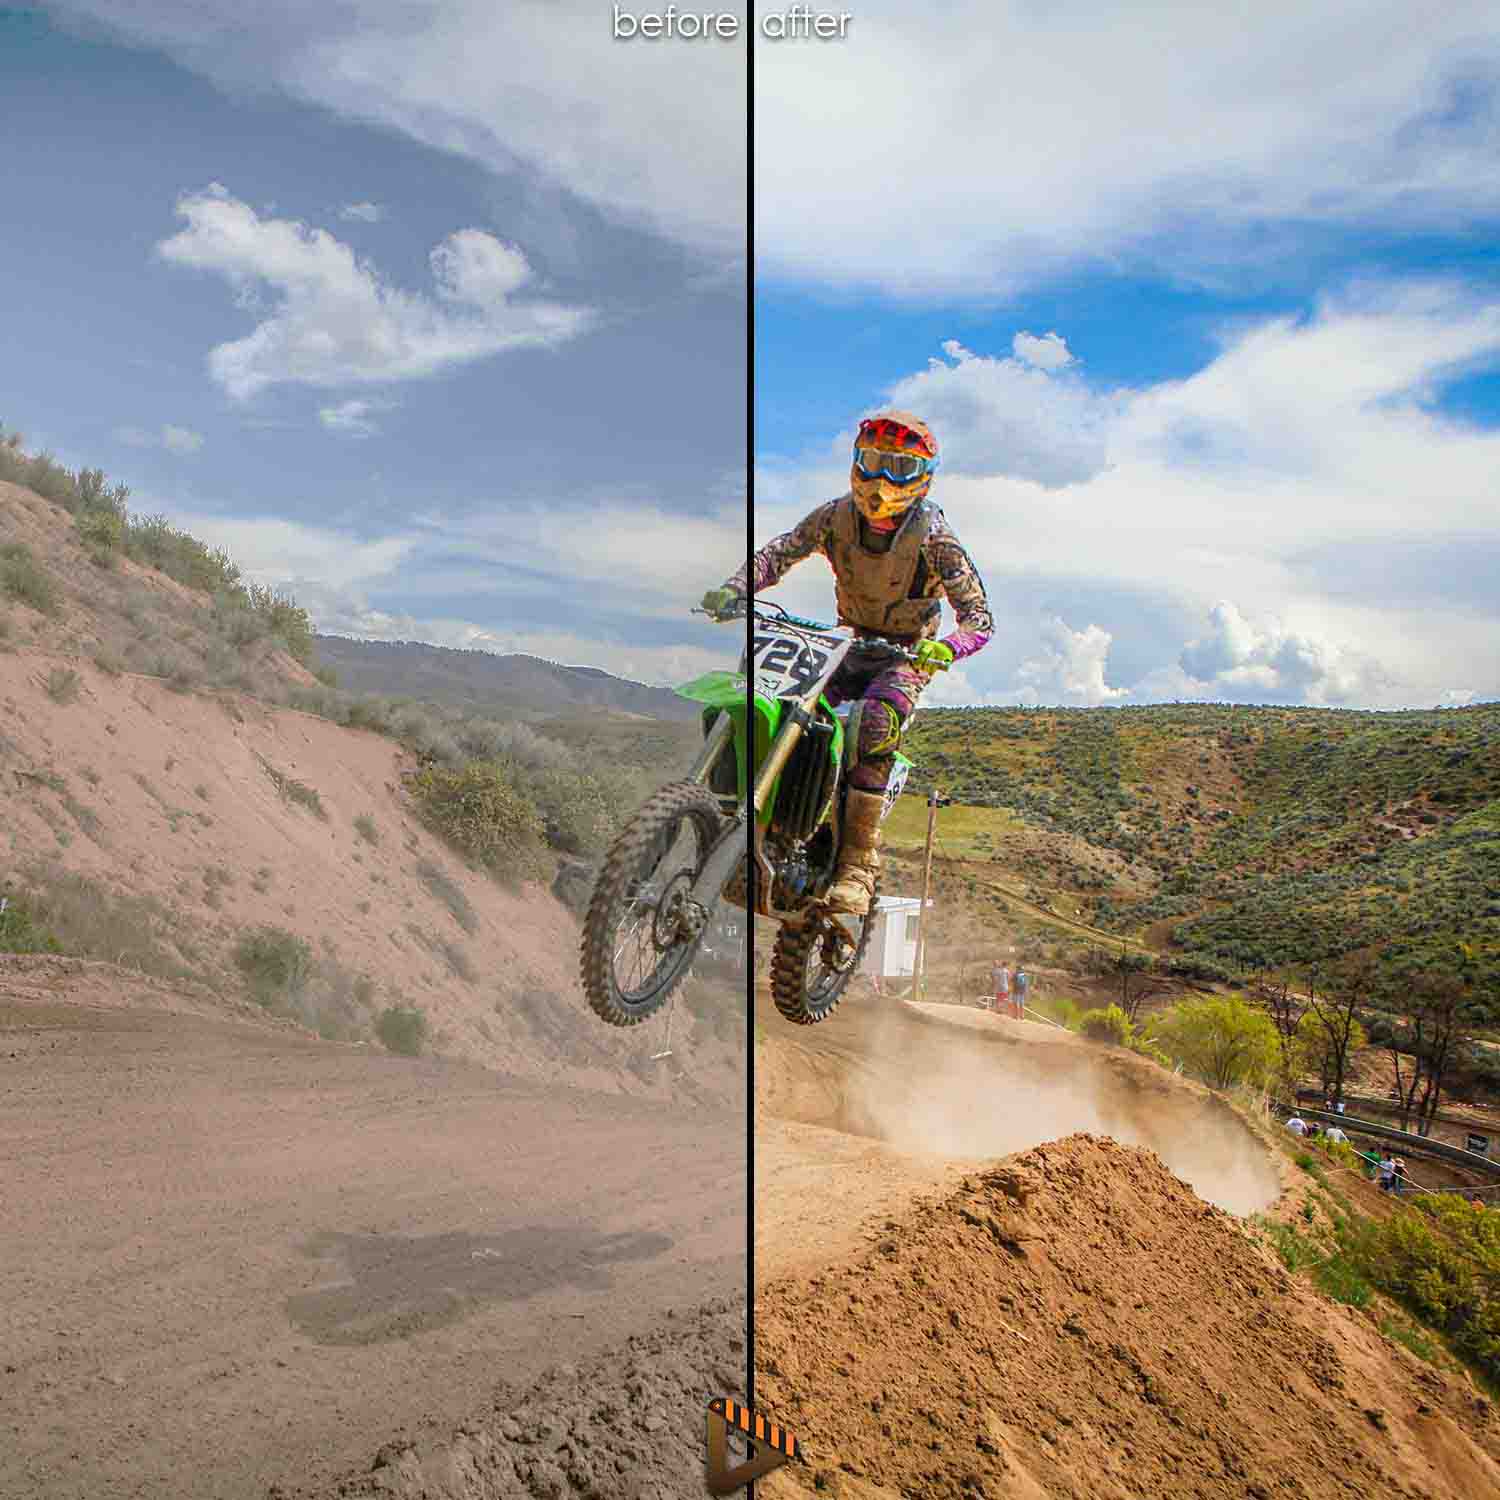 motocross rider on track with affinity preset applied before and after